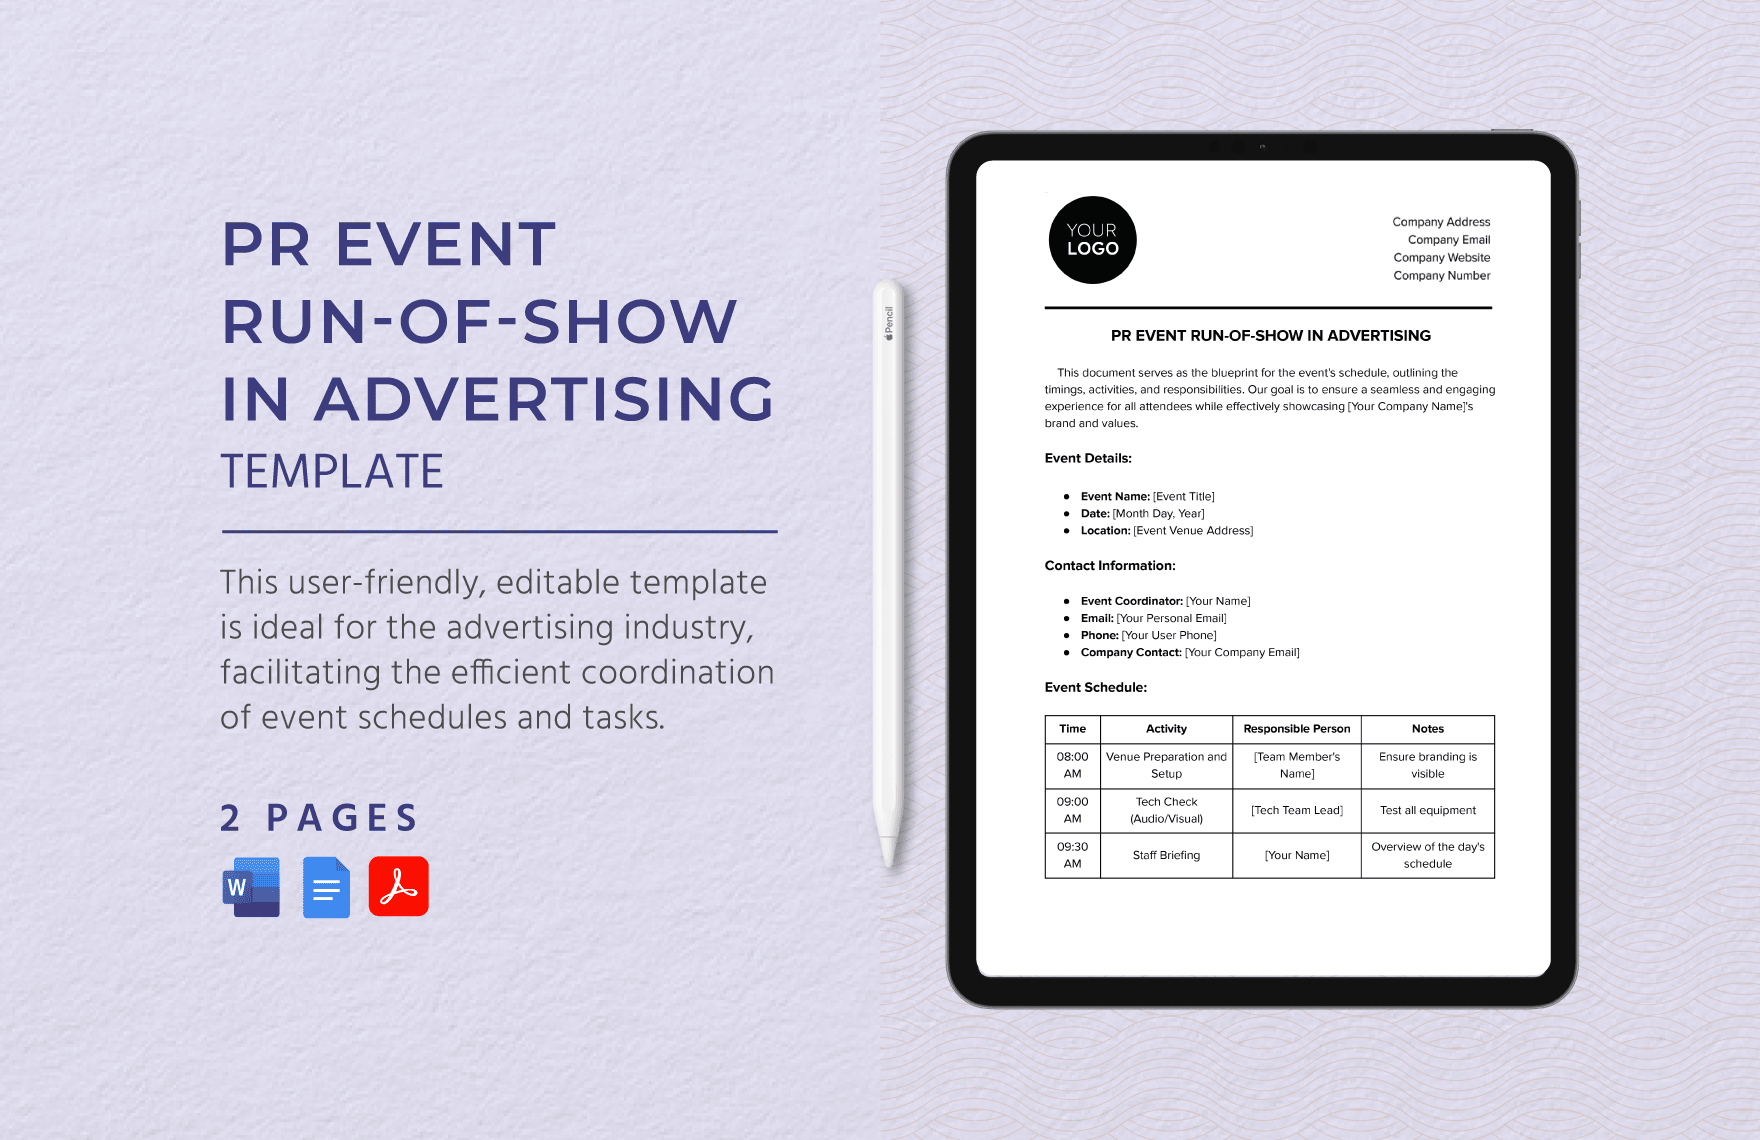 PR Event Run-of-Show in Advertising Template